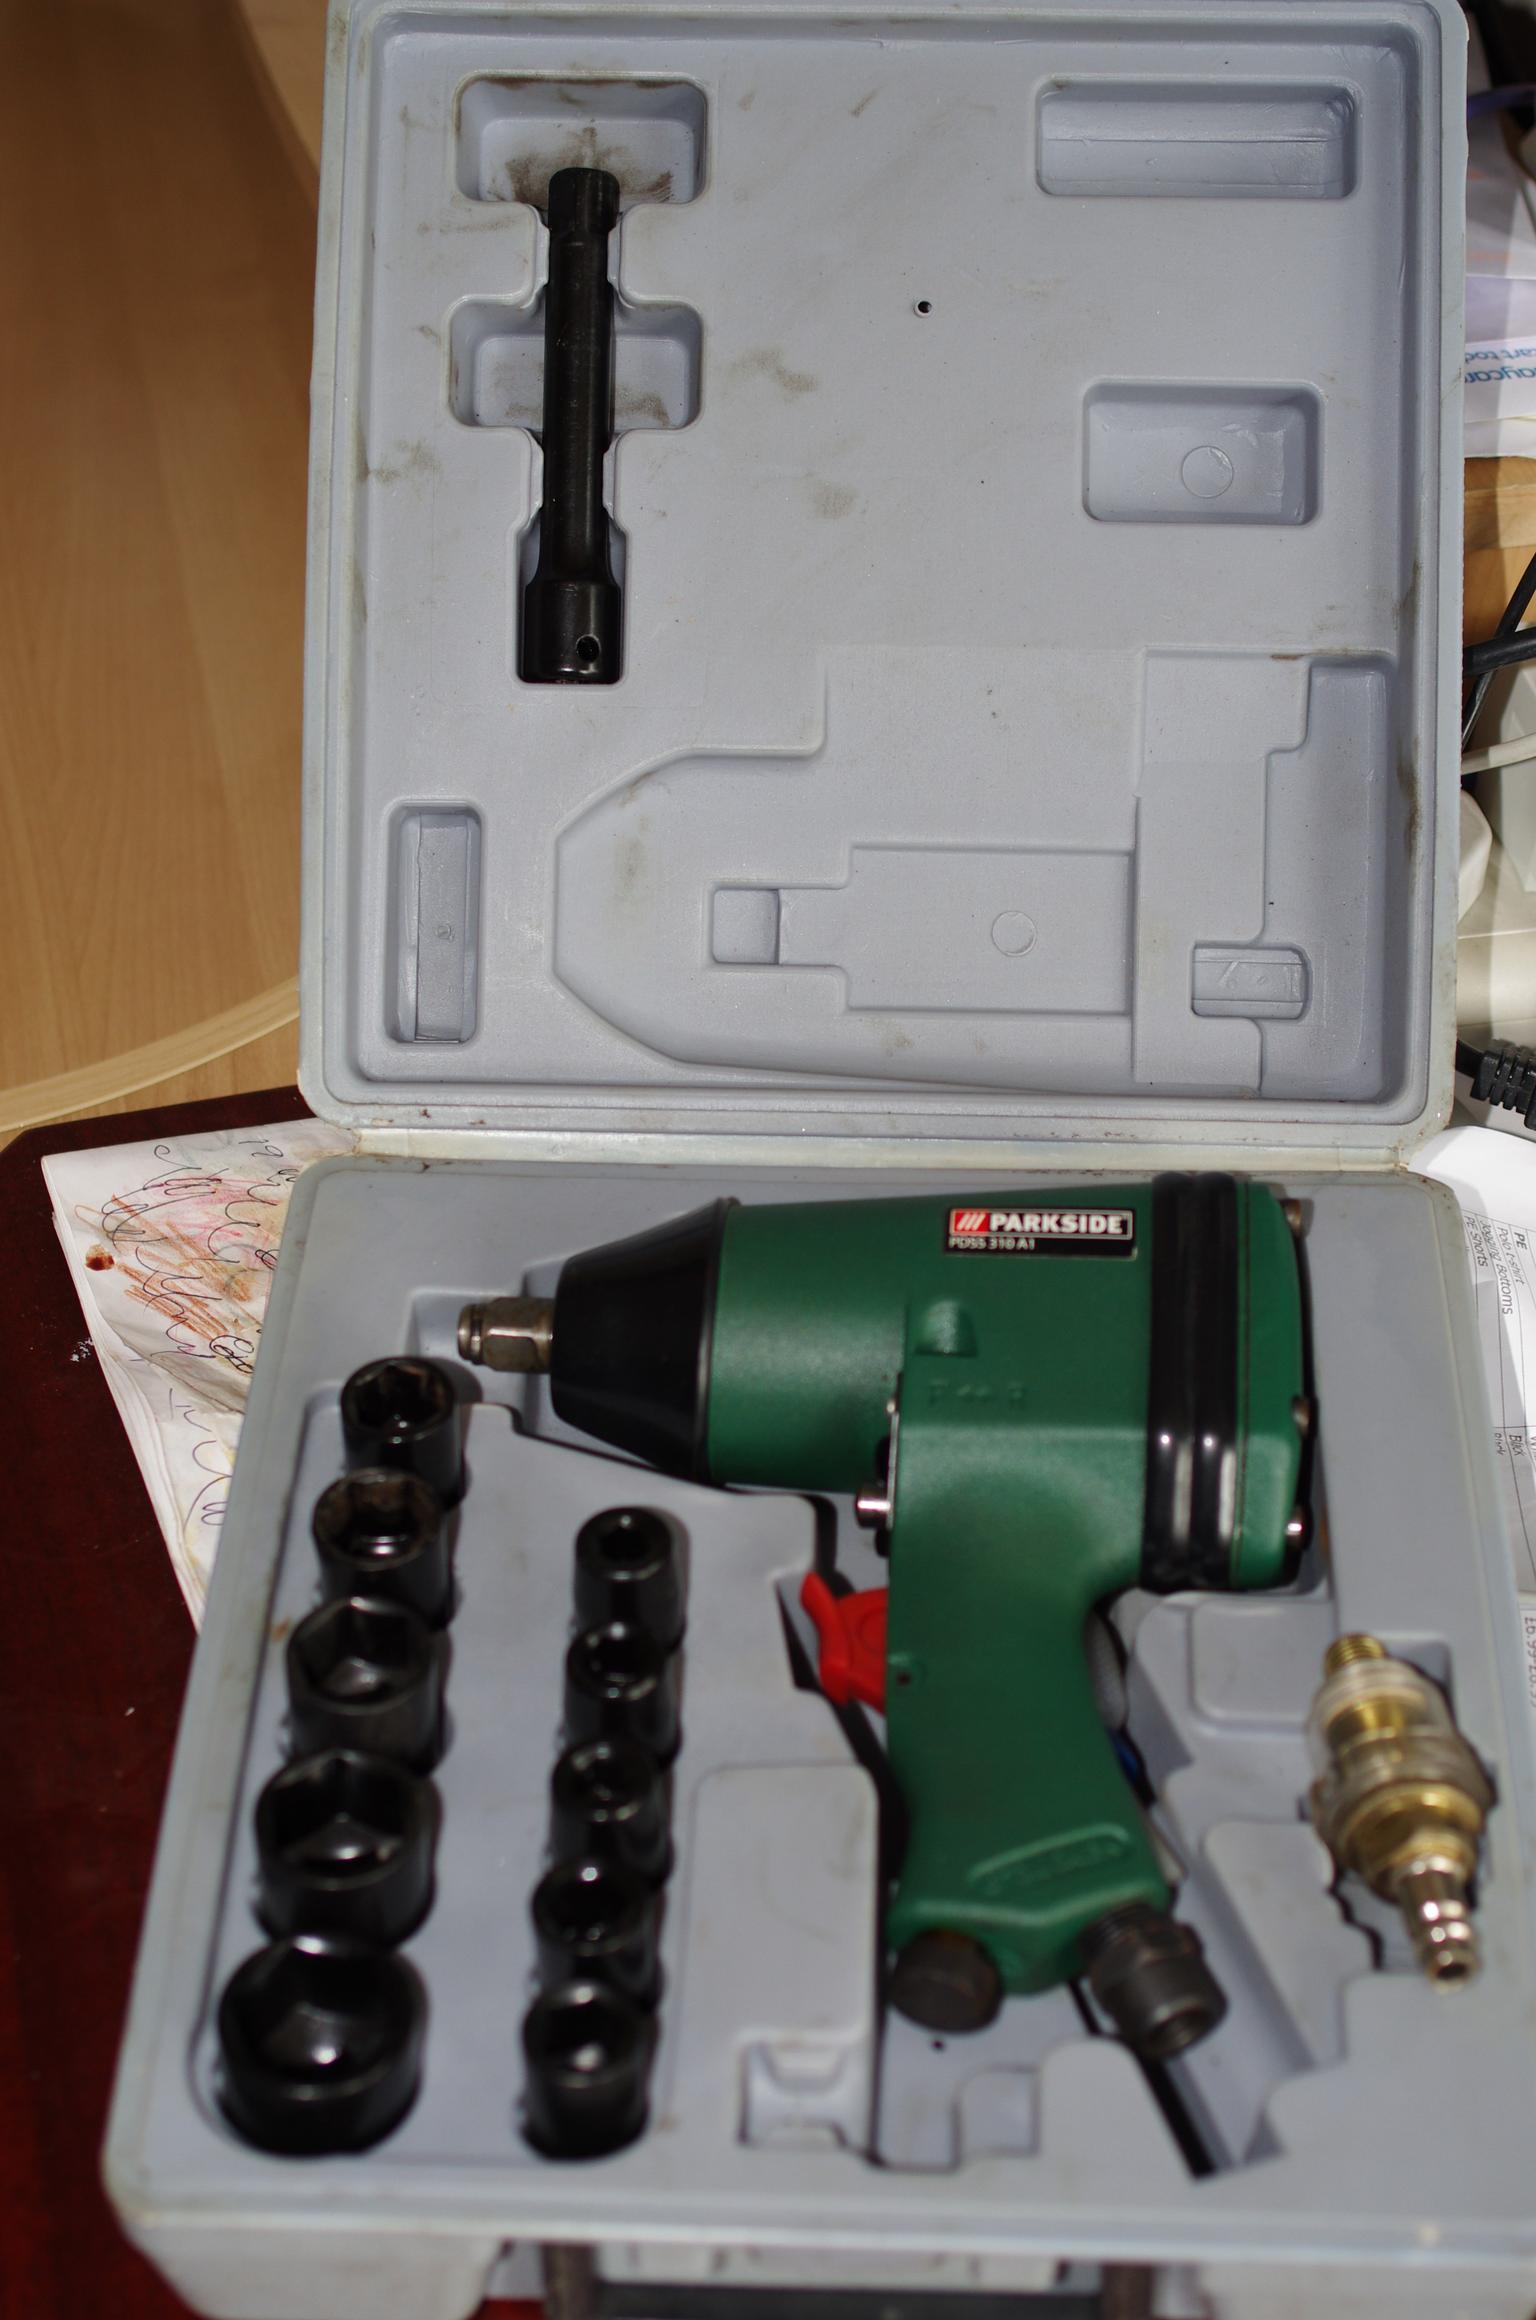 PNEUMATIC IMPACT WRENCH PDSS 310 A2 PARKSIDE